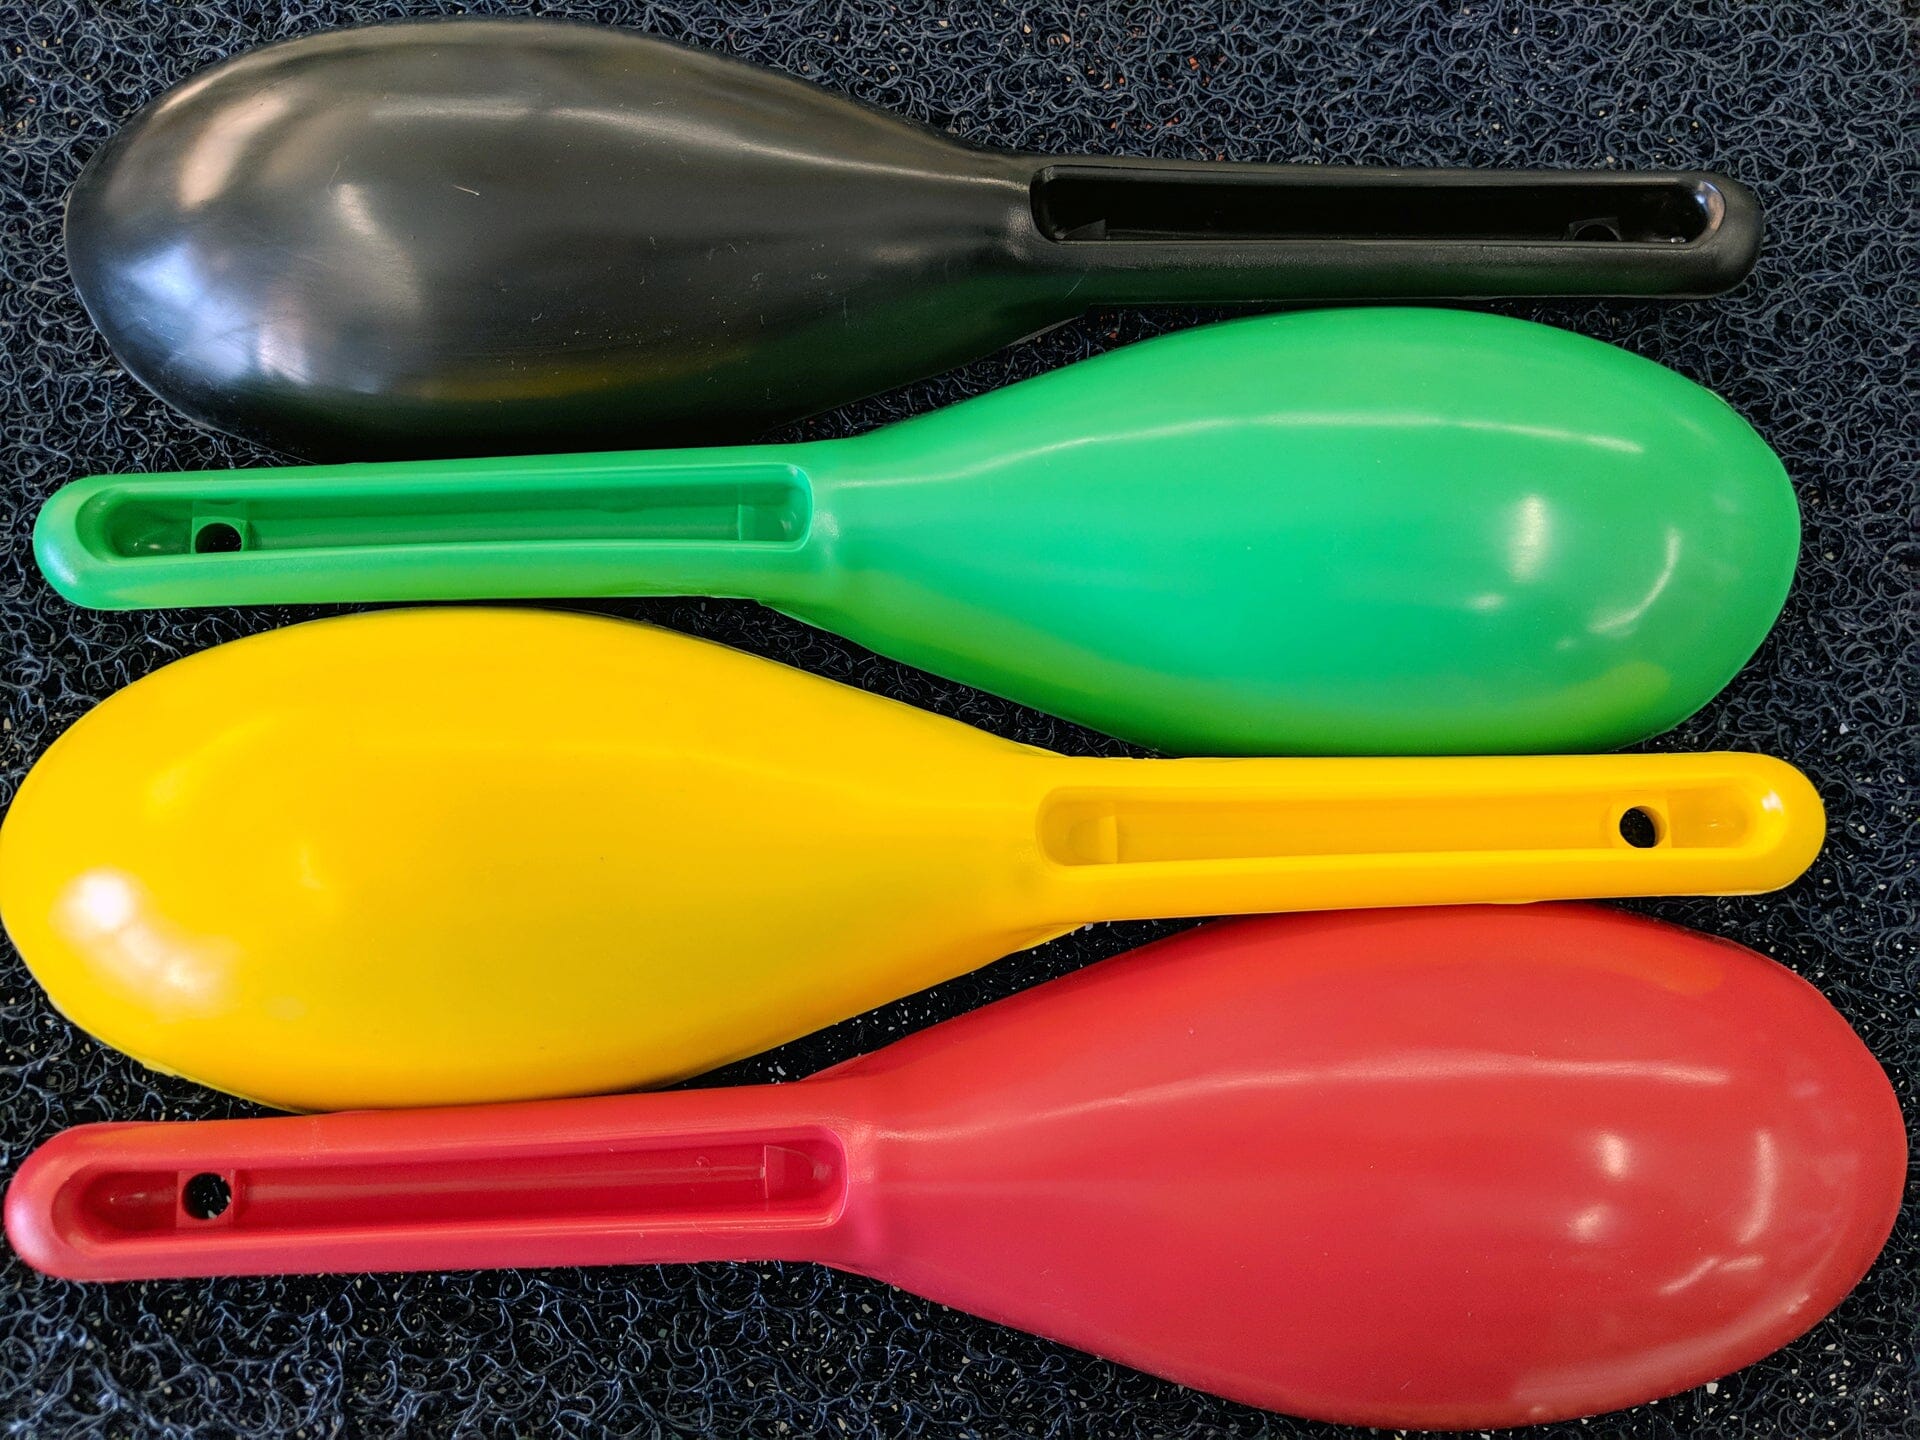 Bottom view of four gold nugget prospecting scoops, red, yellow, green, and black